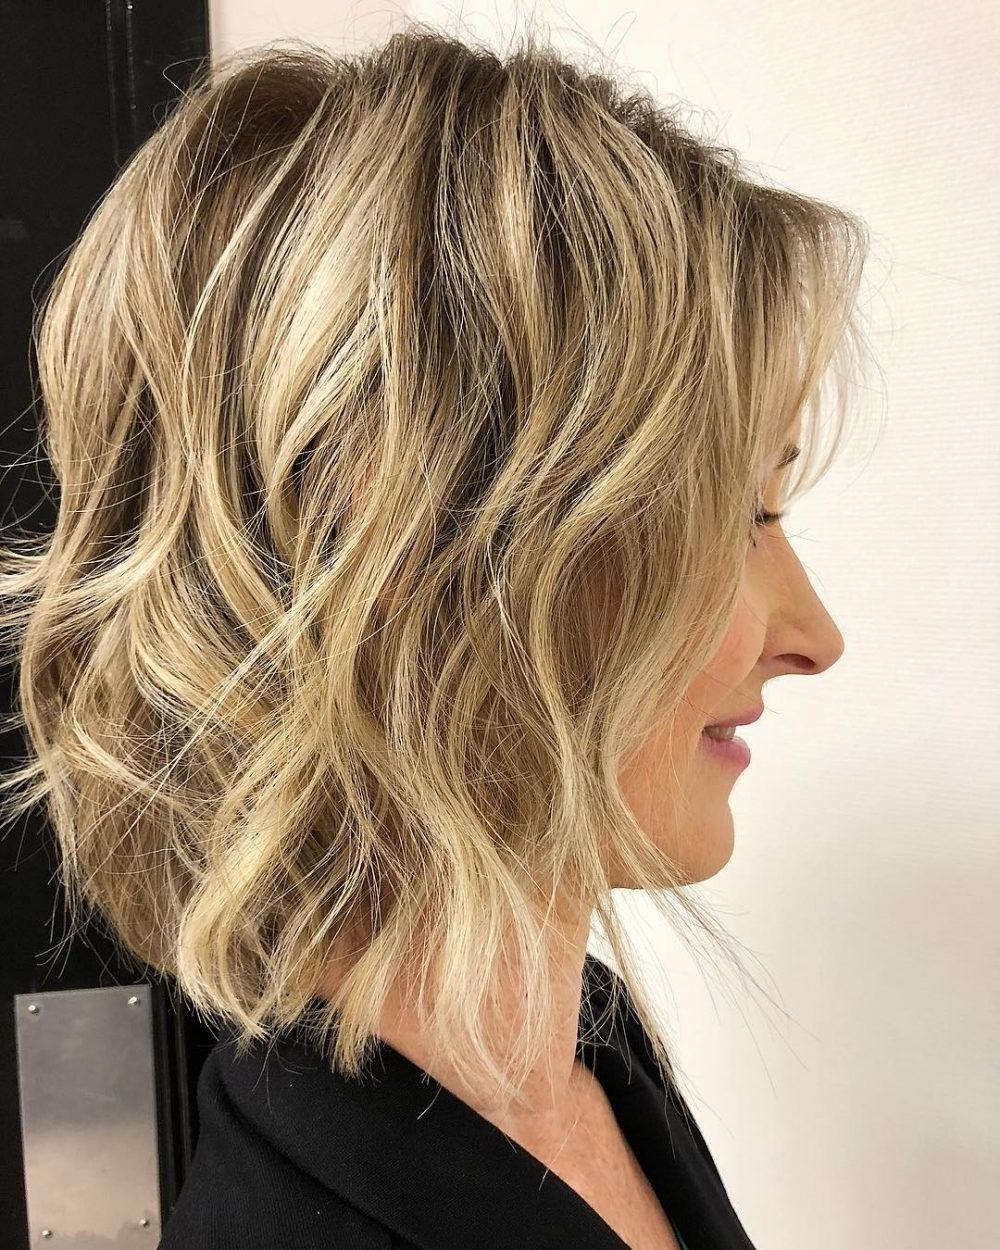 43 Perfect Short Hairstyles For Fine Hair In 2018 Pertaining To 2018 Long Voluminous Pixie Hairstyles (View 18 of 20)